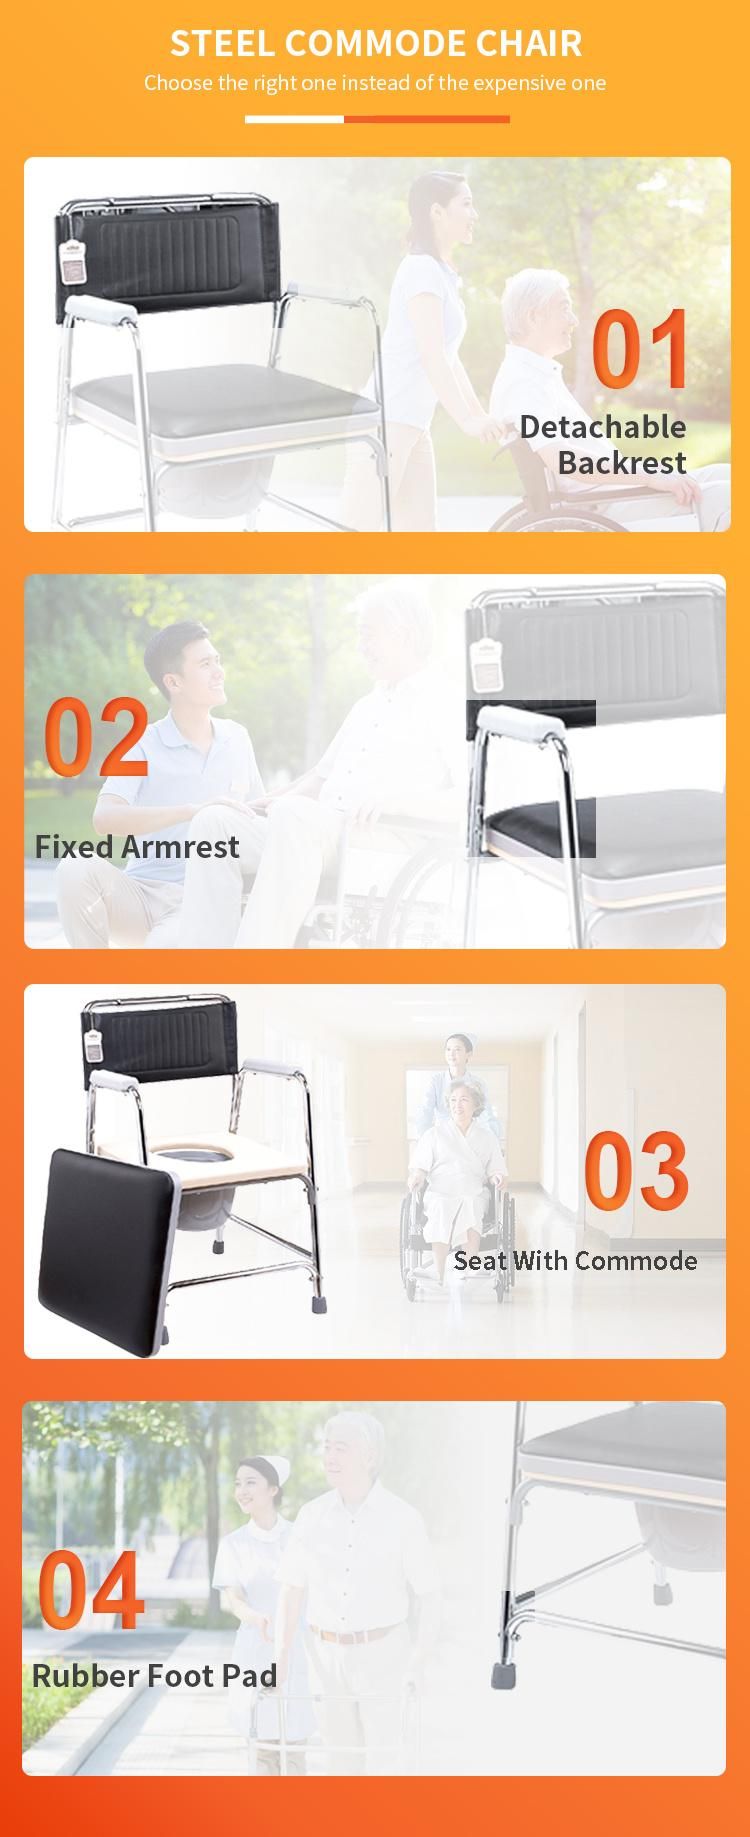 Hot Selling Economy Base Chrome Cover Frame PVC Soft Cushion Seat Board Weight Capacity 100kgs Hospital and Home Can Use Commode Chair Get CE FDA for Elder